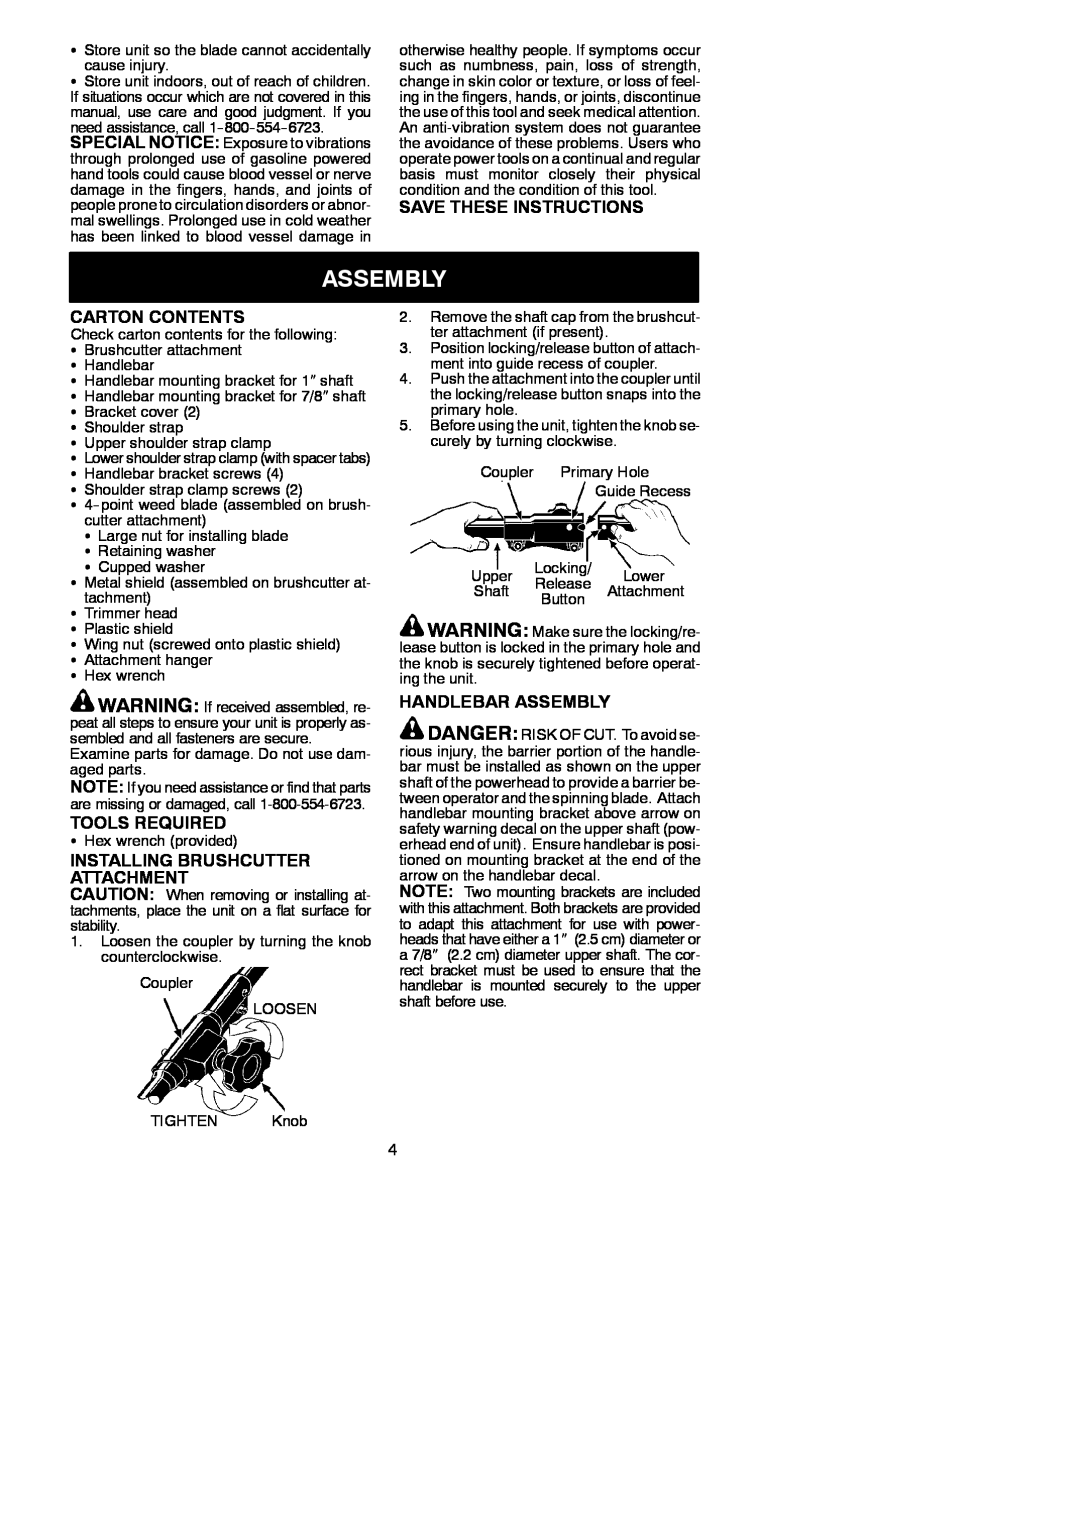 Poulan 530164264 Assembly, Save These Instructions, Carton Contents, Tools Required, Installing Brushcutter Attachment 